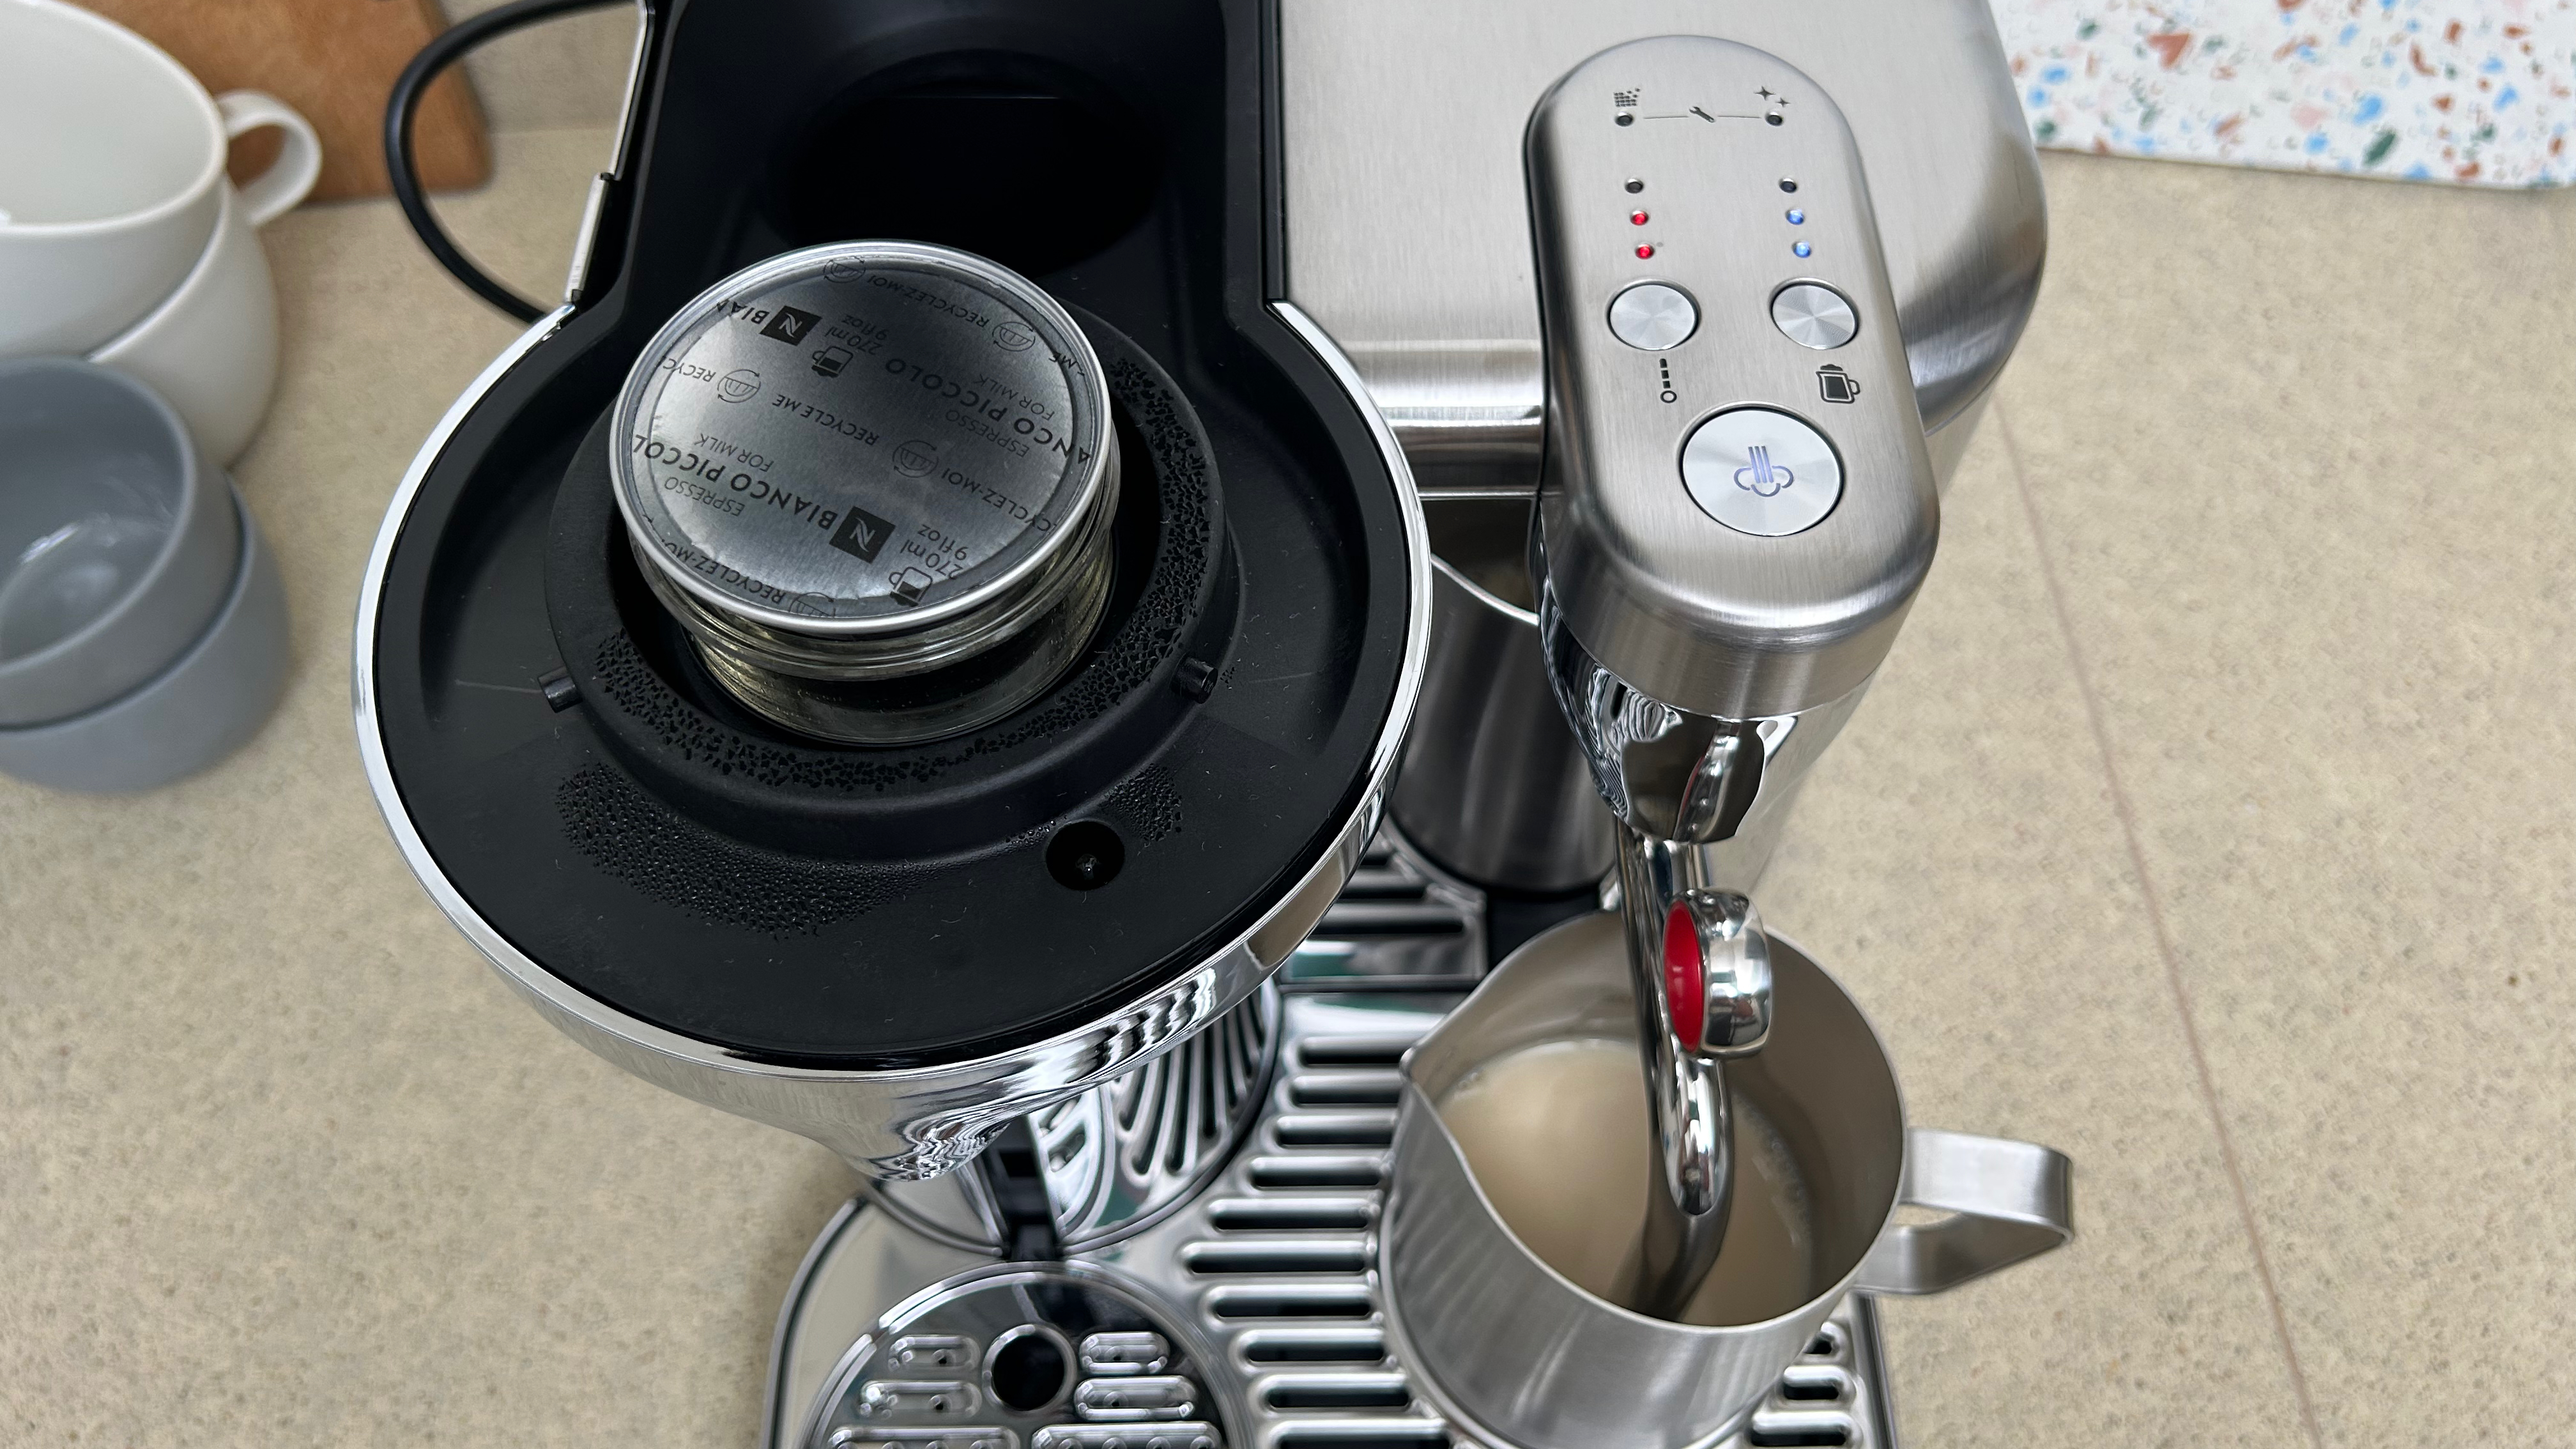 Nespresso Vertuo Creatista from above, showing the pre-brewing setup